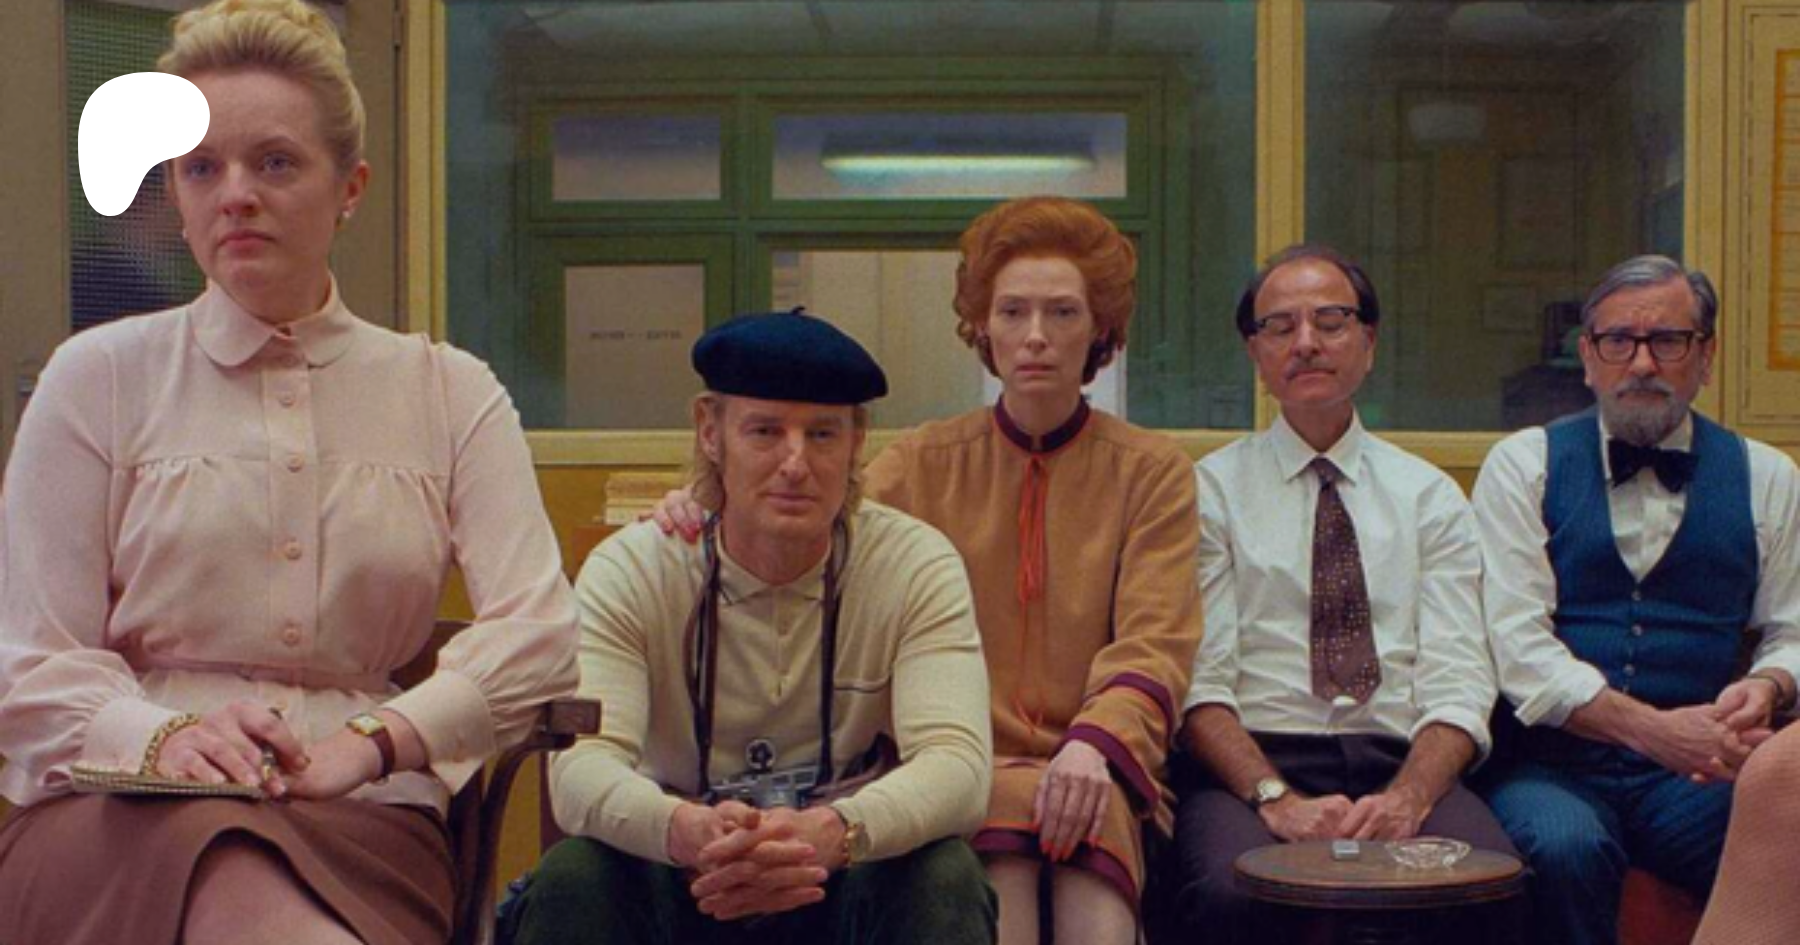 REVIEW: Absurdist comedy 'Grand Budapest Hotel' is best left vacant, Entertainment